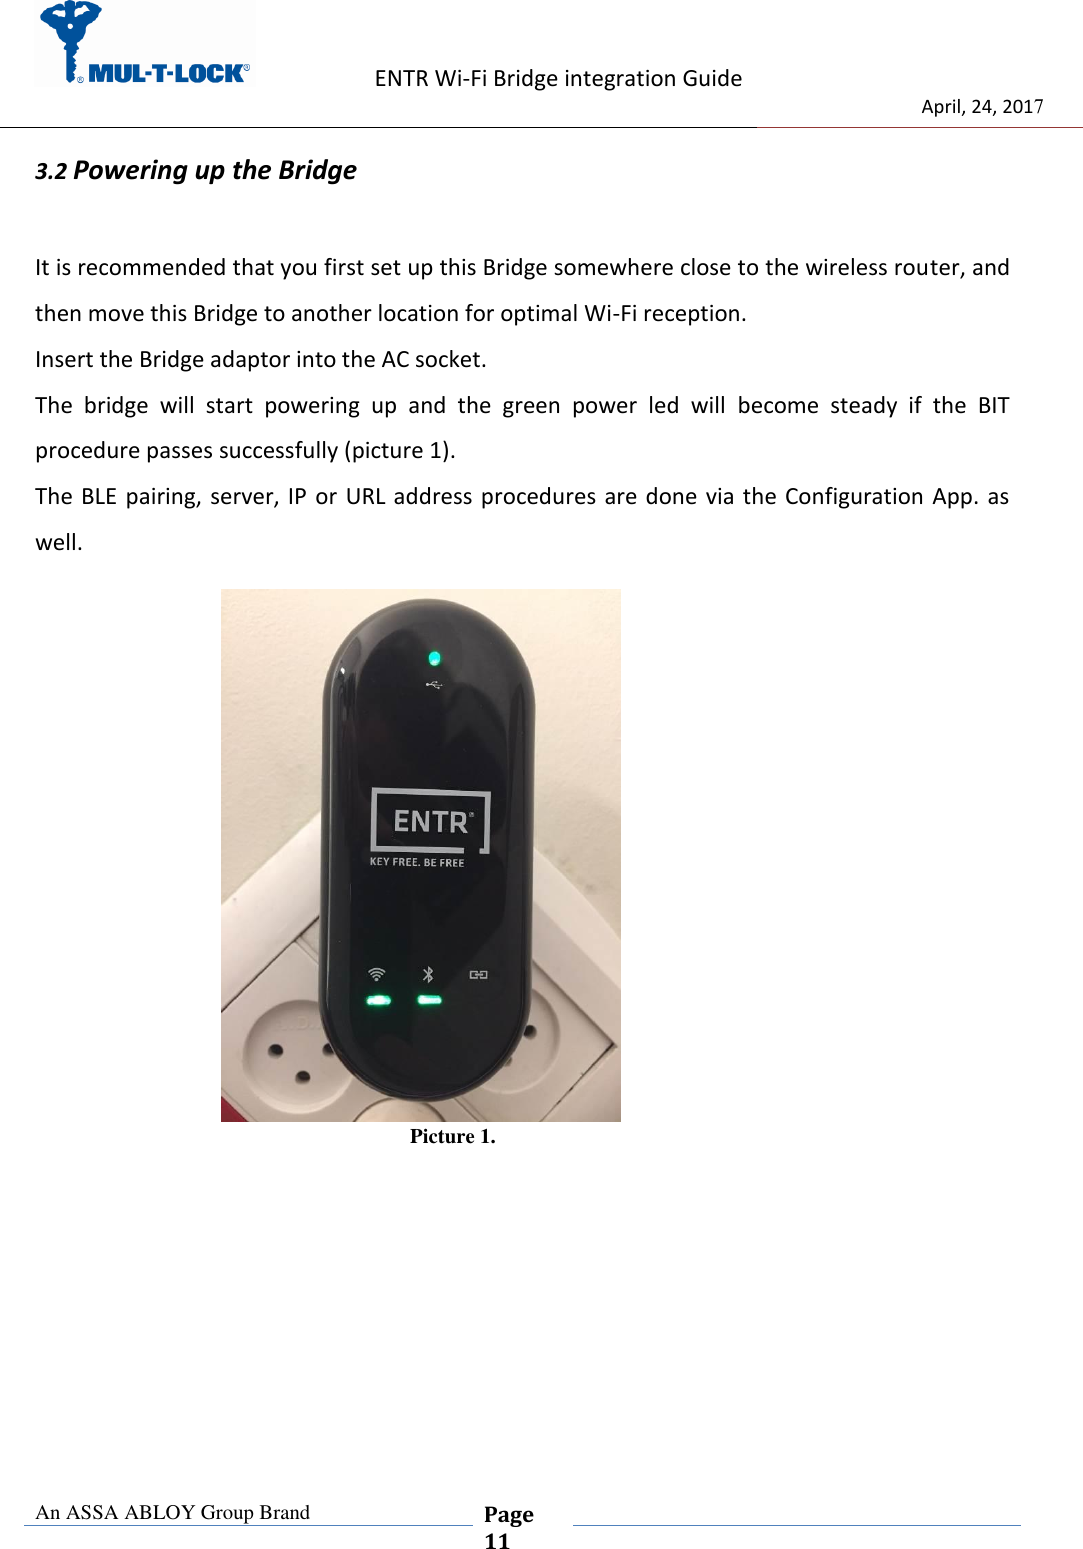                    ENTR Wi-Fi Bridge integration Guide                                  April, 24, 2017  An ASSA ABLOY Group Brand  Page 11    3.2 Powering up the Bridge  It is recommended that you first set up this Bridge somewhere close to the wireless router, and then move this Bridge to another location for optimal Wi-Fi reception. Insert the Bridge adaptor into the AC socket. The  bridge  will  start  powering  up  and  the  green  power  led  will  become  steady  if  the  BIT procedure passes successfully (picture 1). The BLE pairing, server, IP or URL  address procedures are done via the  Configuration App. as well.              Picture 1.     